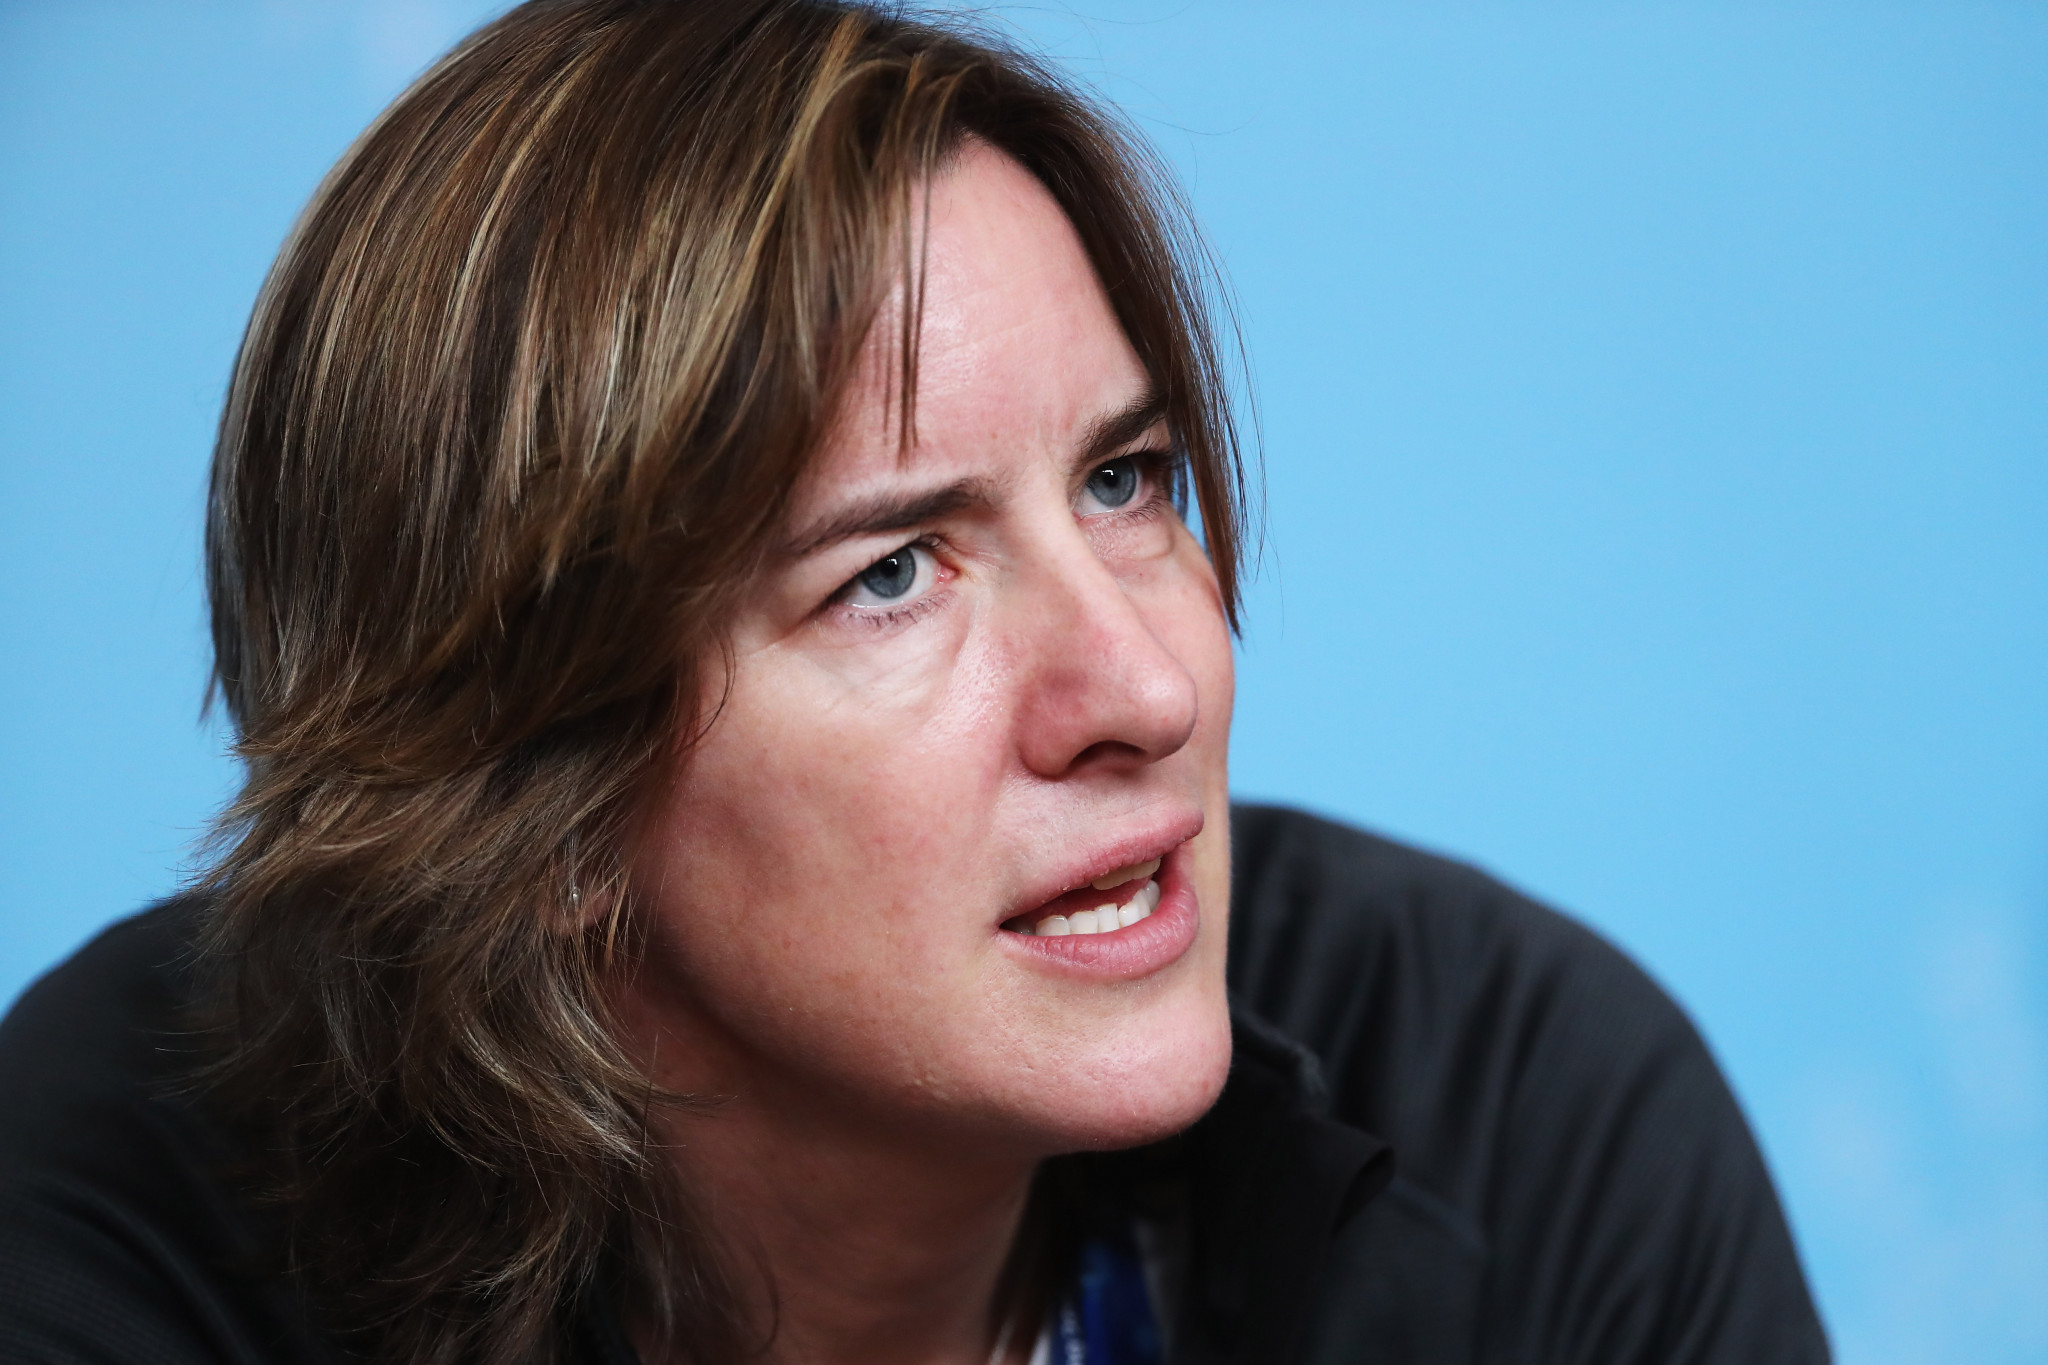 UK Sport chair and four-time Olympic rowing medallist Katherine Grainger spoke at the gender equality breakfast ©Getty Images